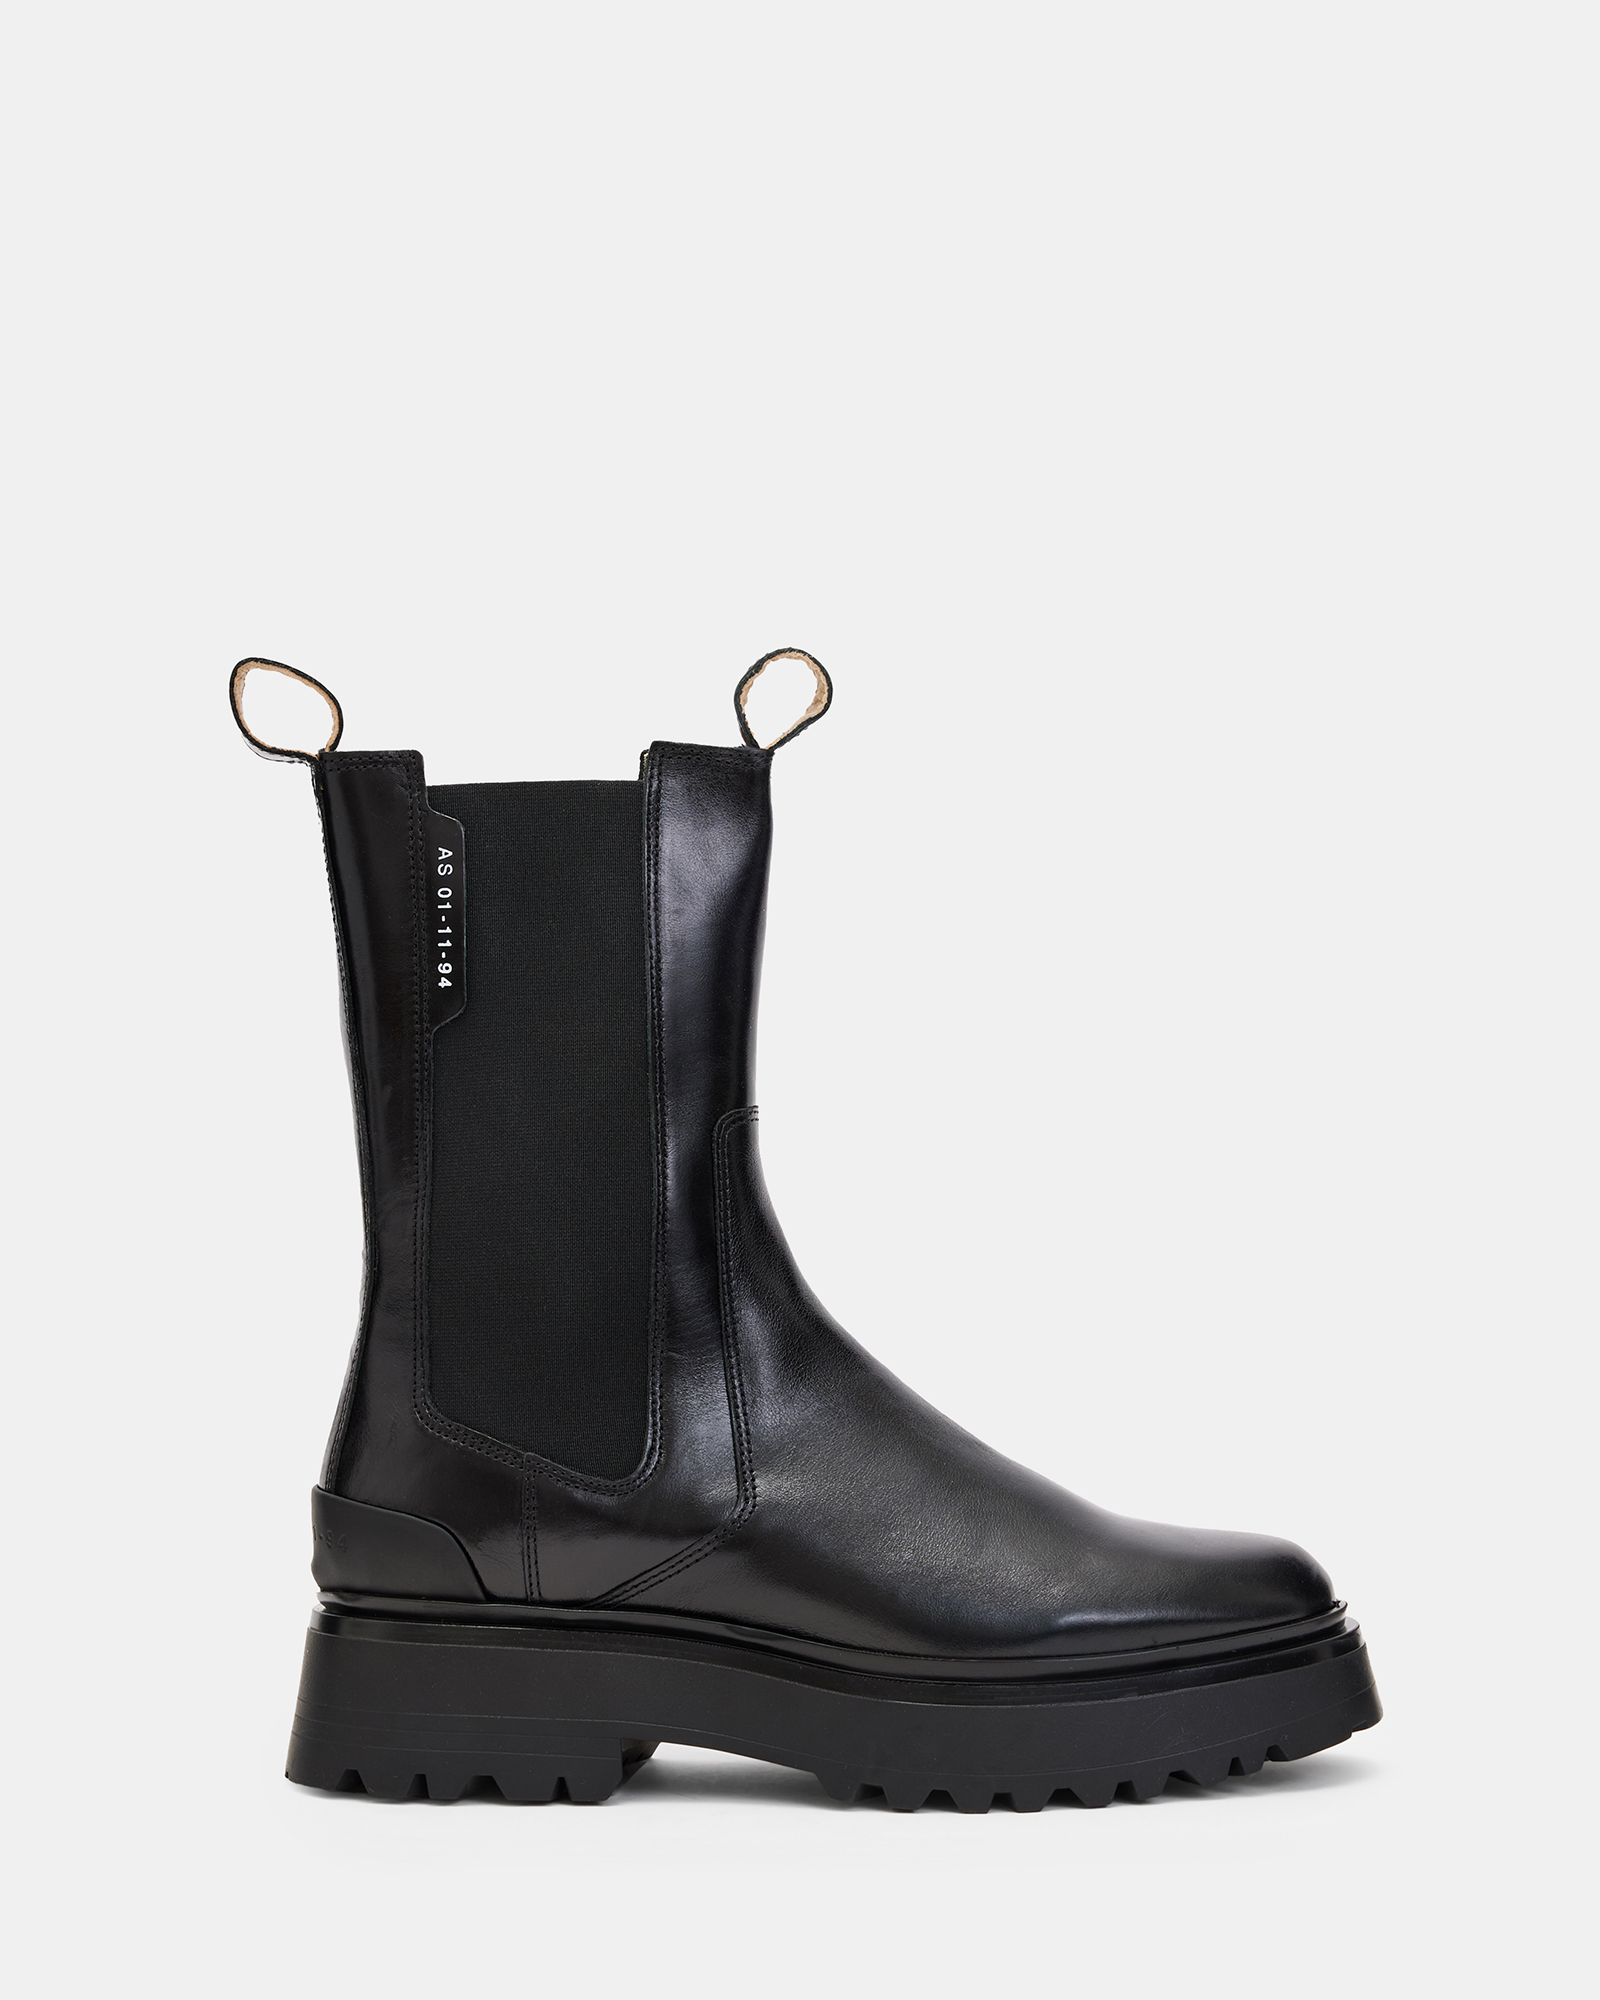 AllSaints Amber Leather Boots,, Black